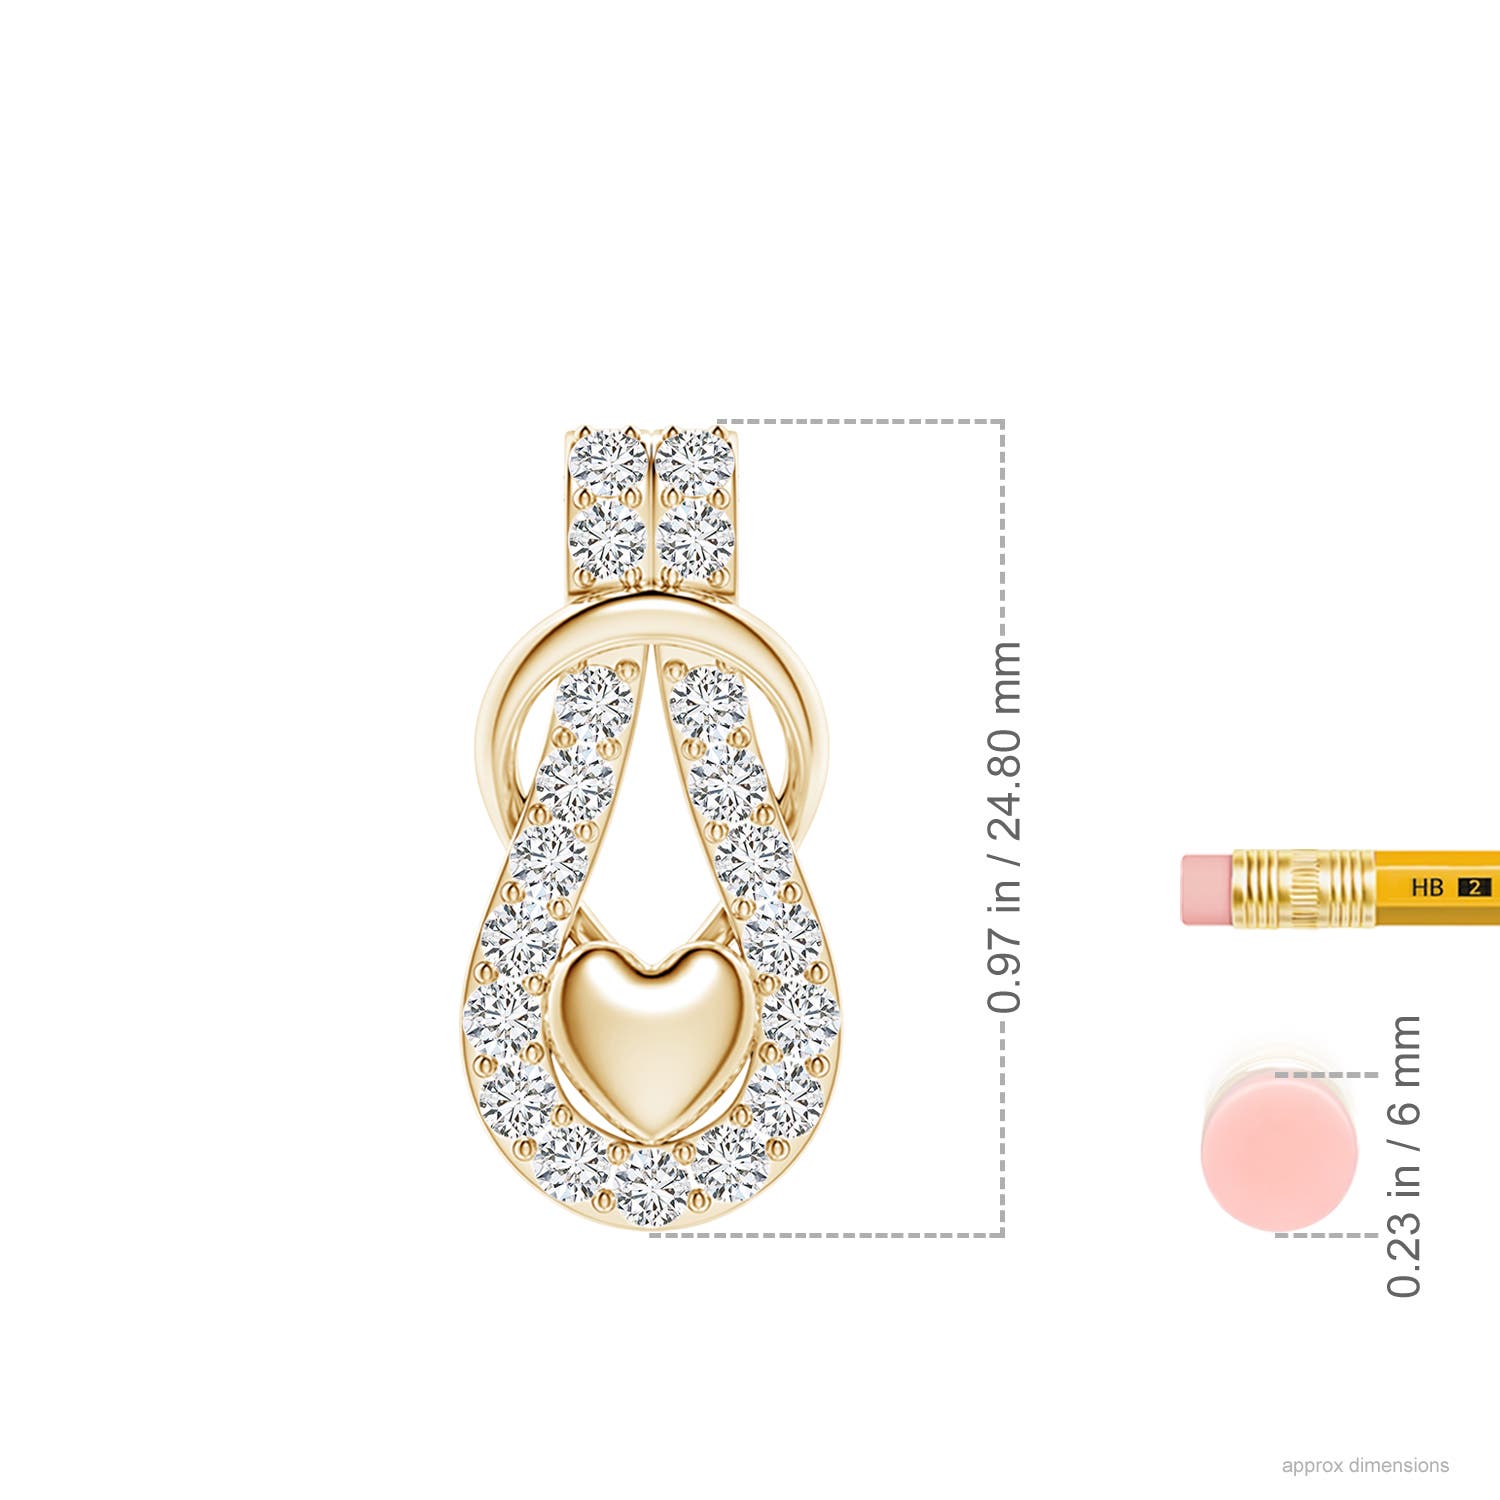 H, SI2 / 0.99 CT / 14 KT Yellow Gold